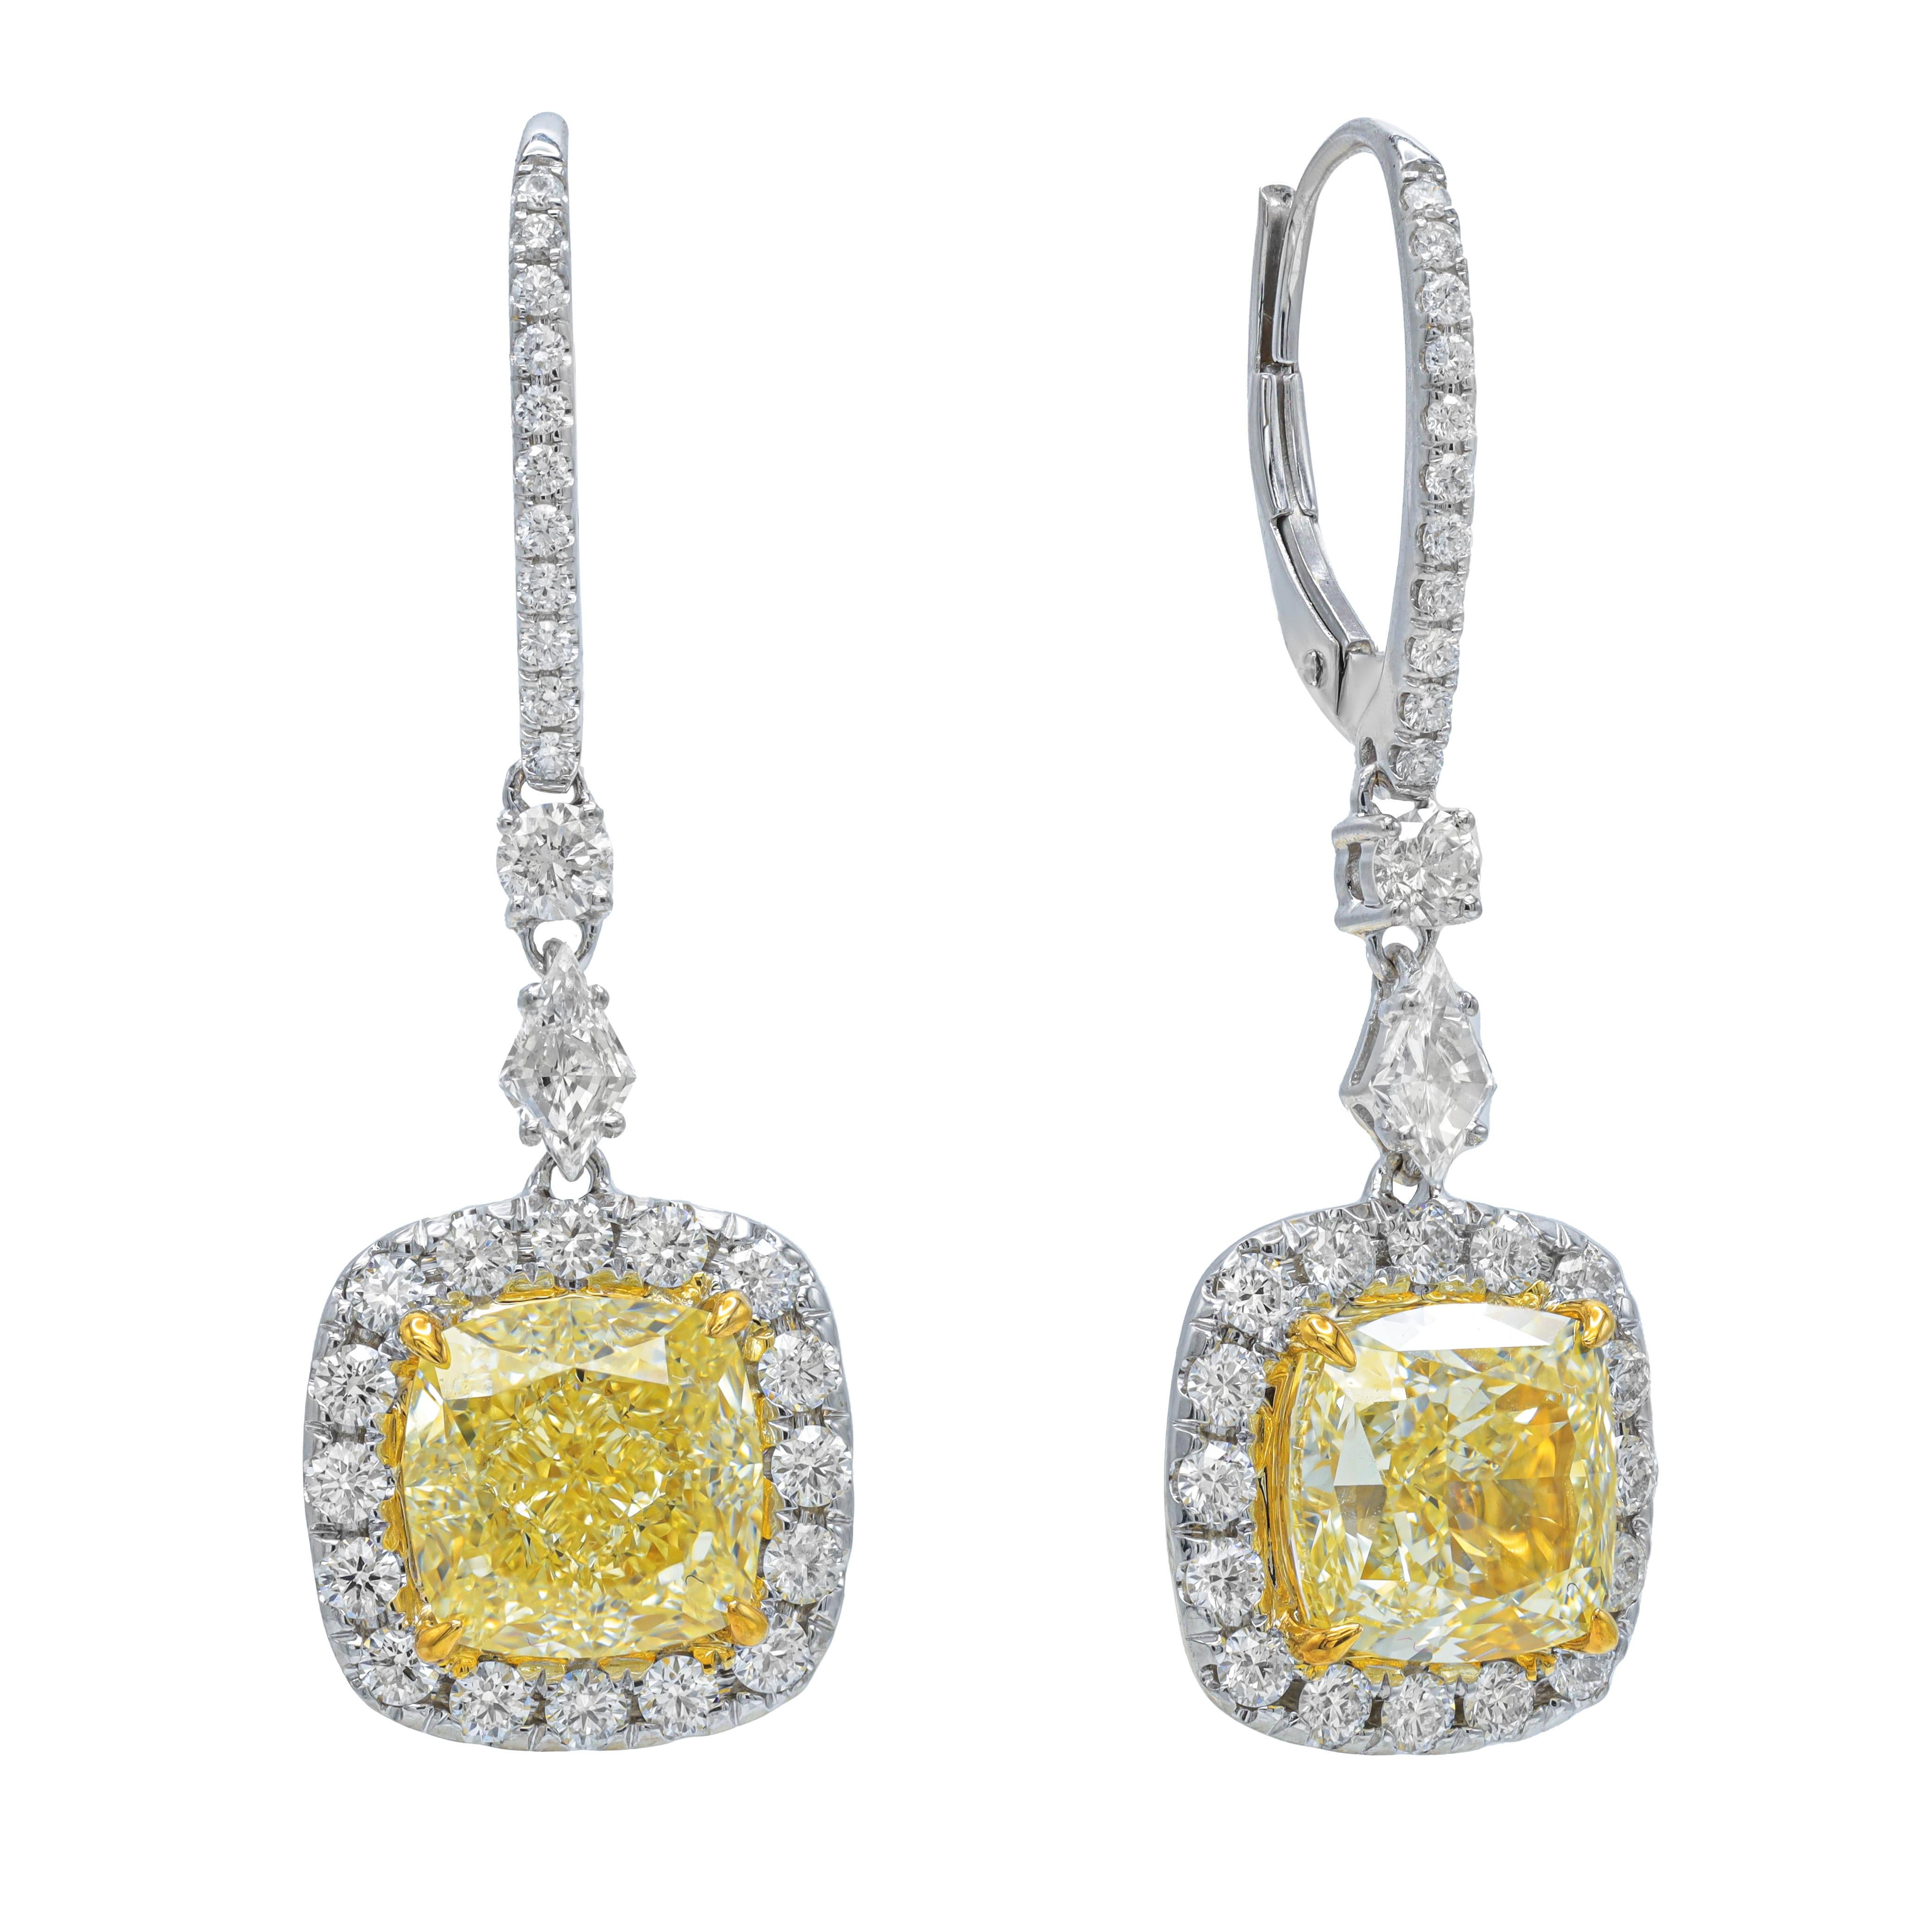 18KT TWO TONE GOLD FANCY LIGHT YELLOW DIAMOND EARRING SET IN A HALO SETTING, FEATURES GIA CERTIFIED YELLOW DIAMONDS, 3.21CT VVS2 AND 3.26ct VVS2OF FANCY LIGHT YELLOW CUSHION CUT DIAMONDS AND 1.40 CARATS OF WHITE DIAMONDS AROUND F-G/VS